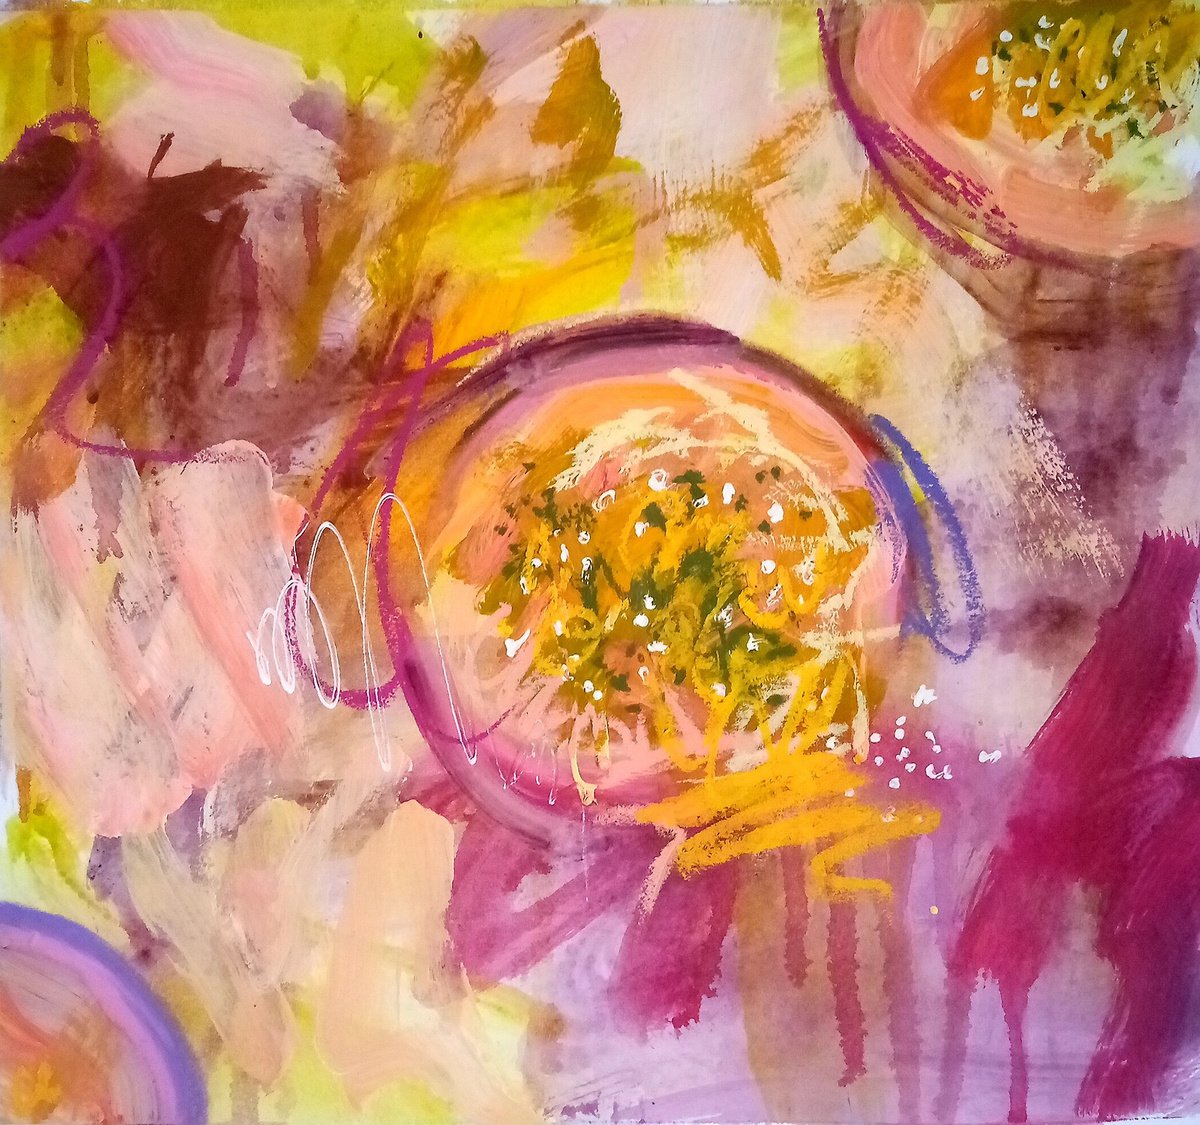 Abstract Passion fruit #1/2021 by Valerie Lazareva